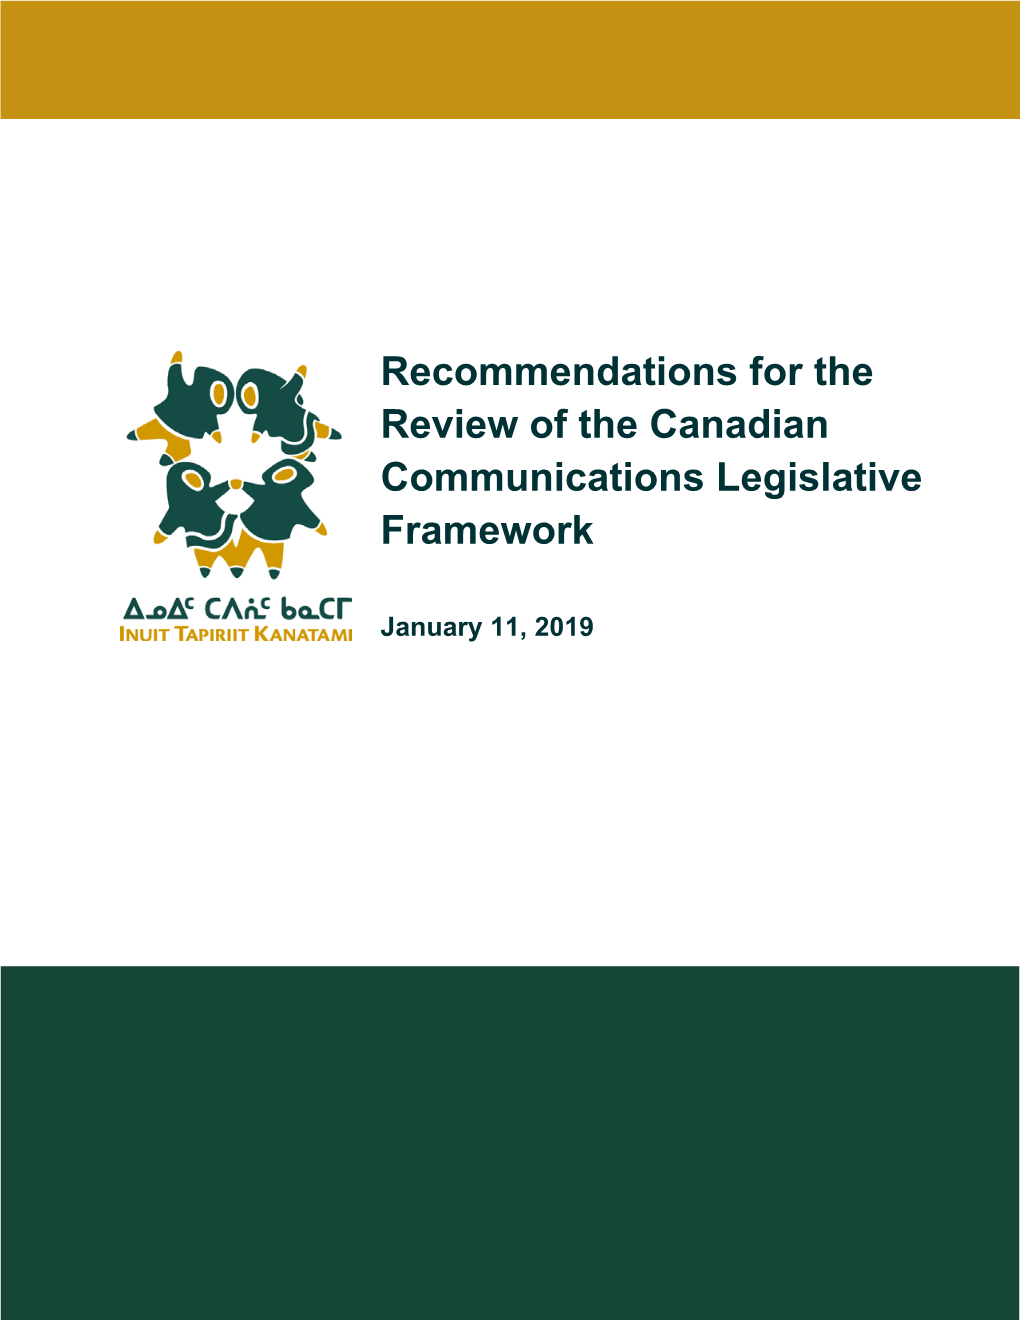 Recommendations for the Review of the Canadian Communications Legislative Framework